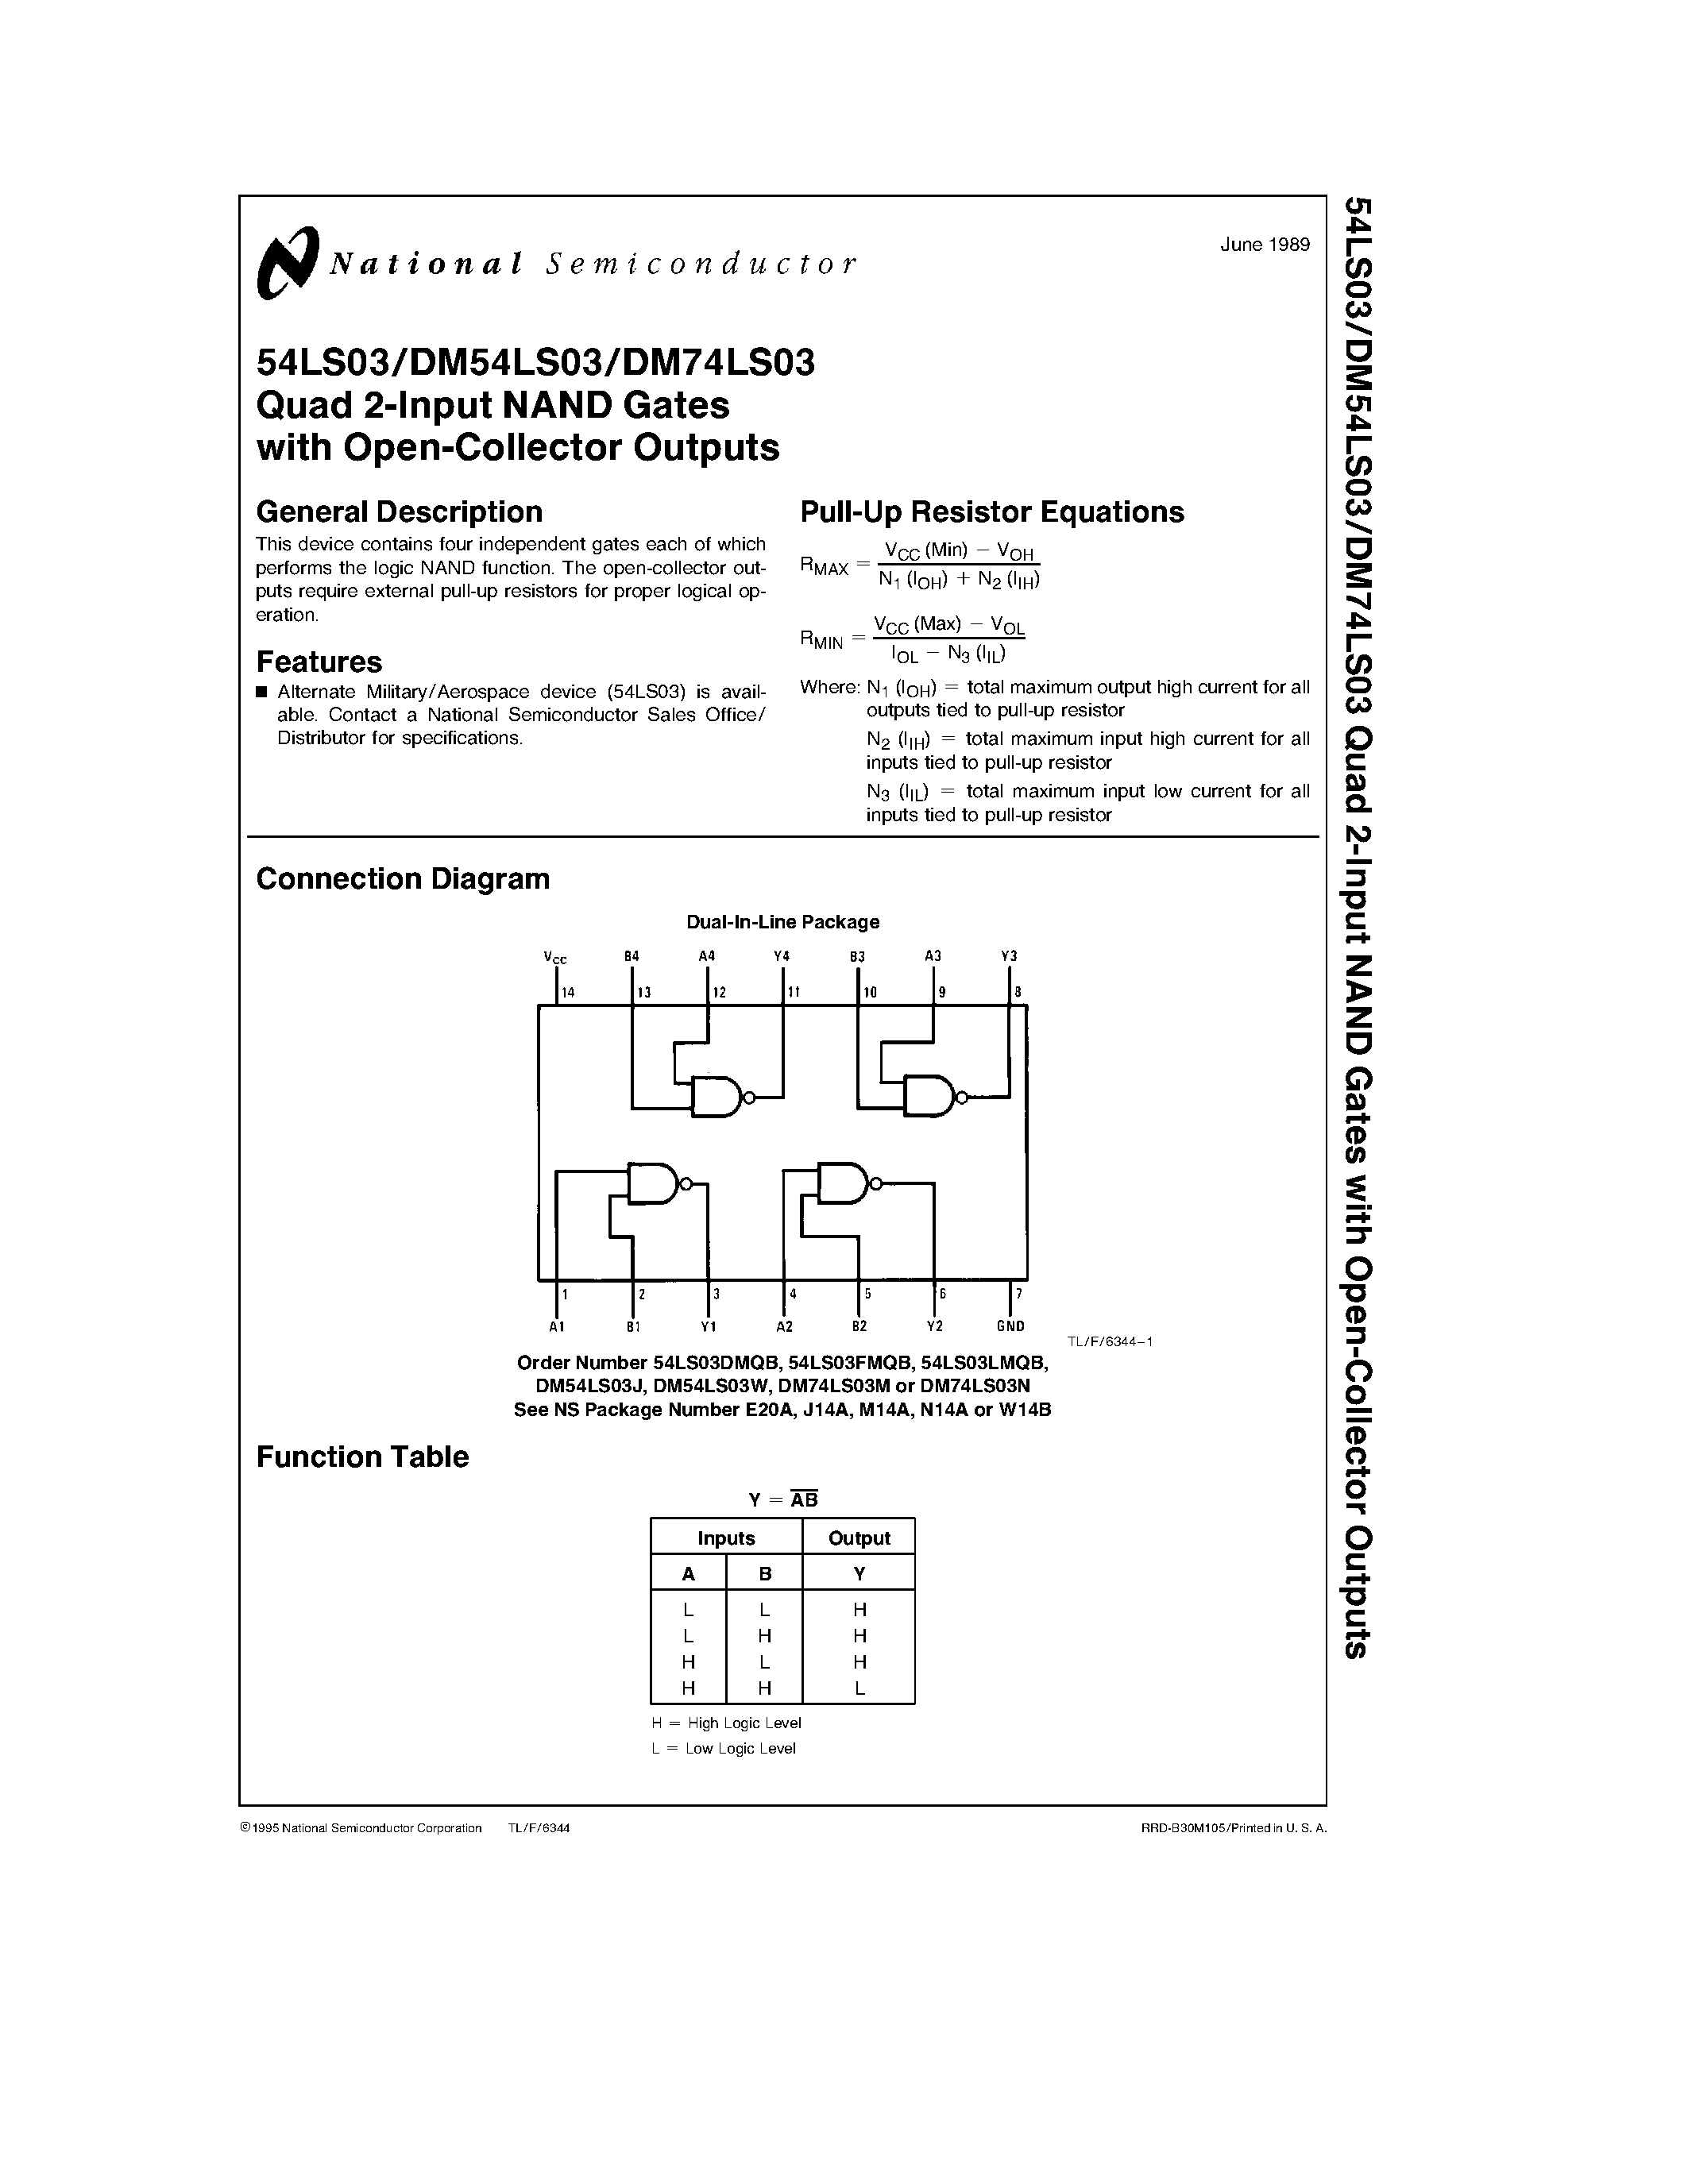 Datasheet 54LS03 - Quad 2-Input NAND Gates with Open-Collector Outputs page 1